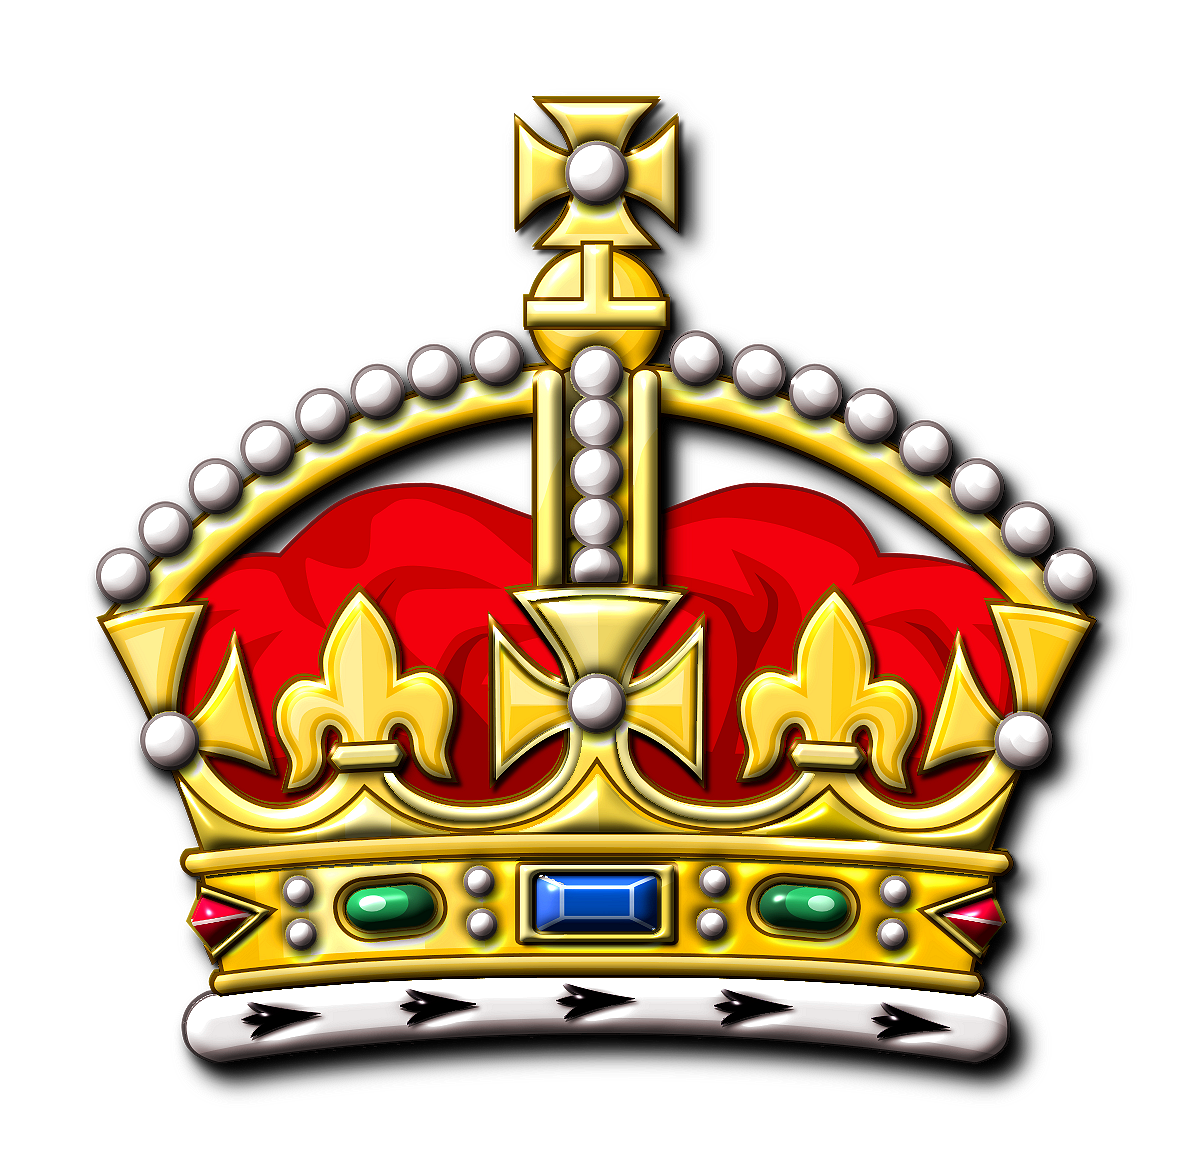 Kings Crown Logo King Crown Logo - Cliparts and Others Art Inspiration